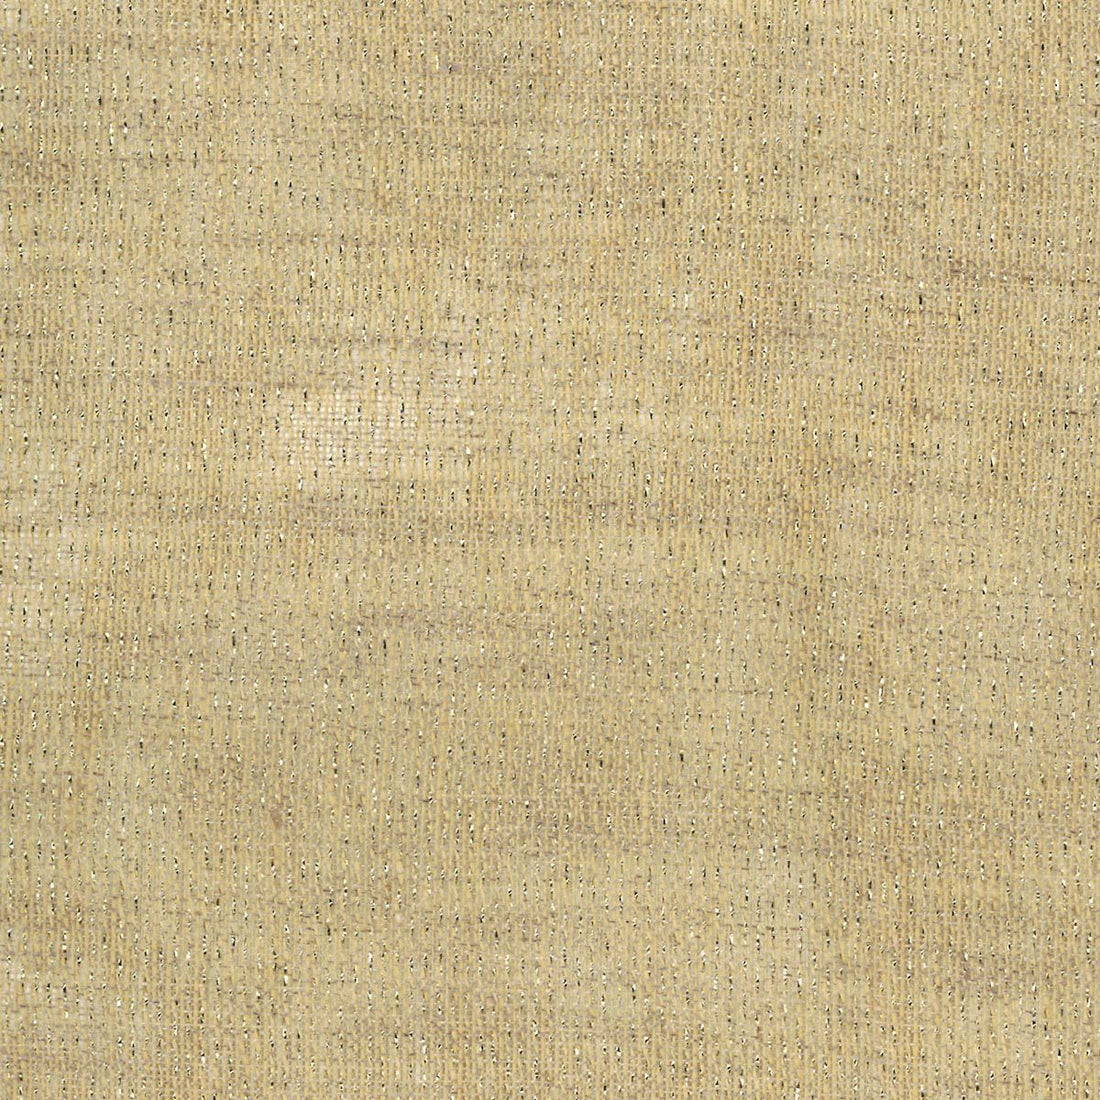 Sheer Ecstasy Gw fabric in gold color - pattern number P0 00021466 - by Scalamandre in the Old World Weavers collection